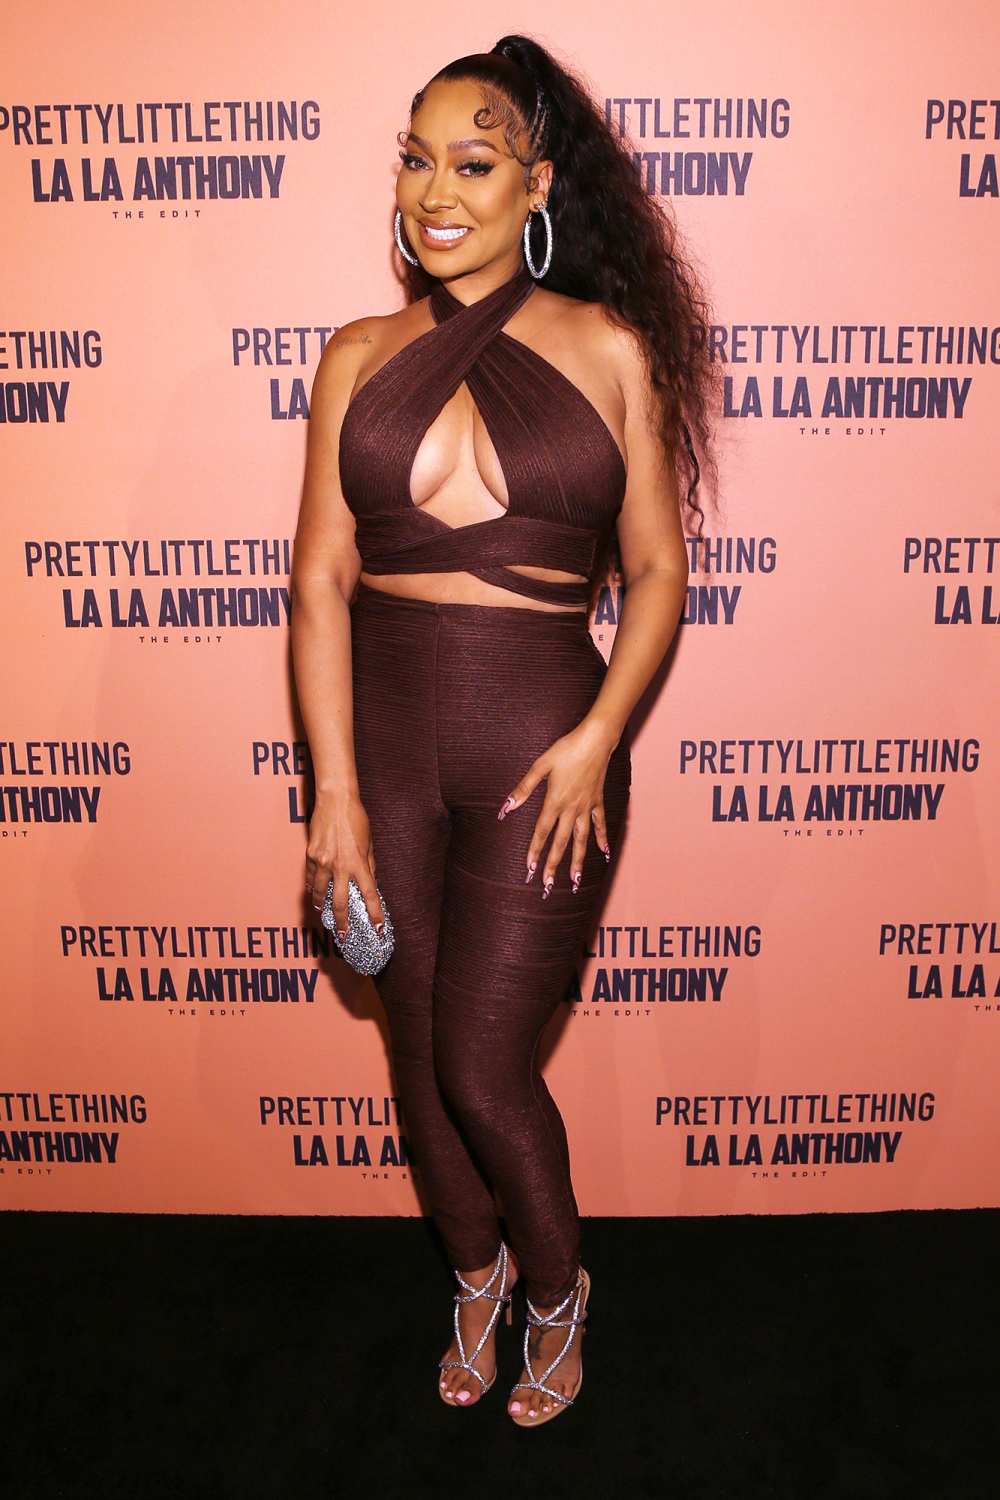 La La Anthony Unveils 2nd Collection With PrettyLittleThing: Pics